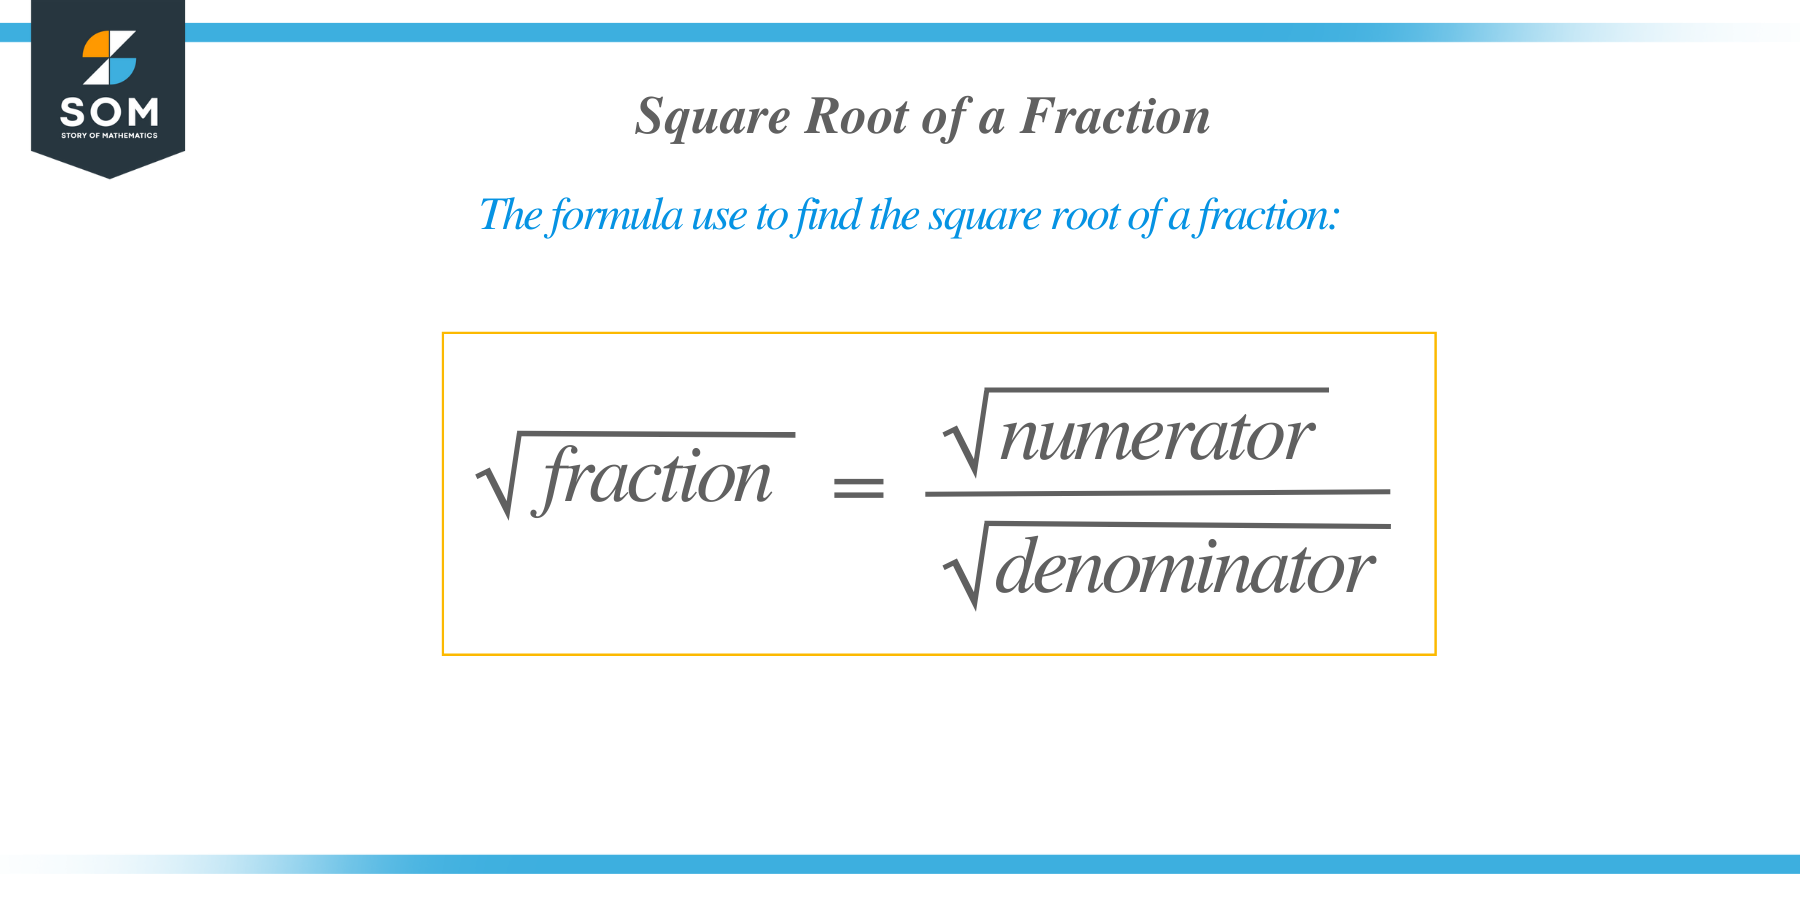 Square Root of a Fraction